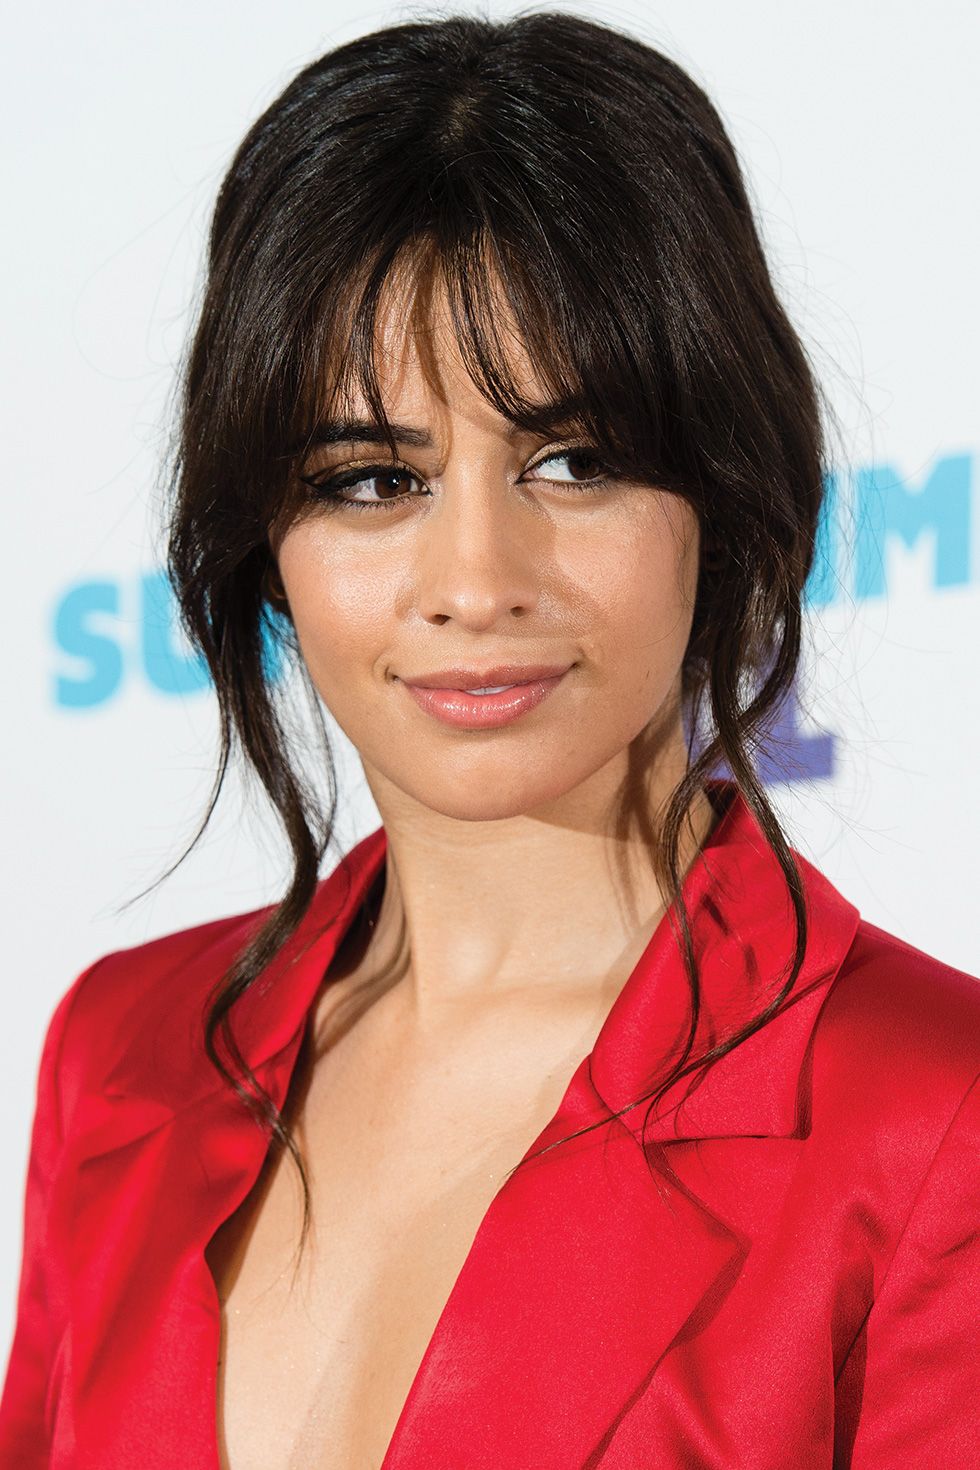 18 Celebrity Hairstyles with Bangs - How to Style Hair with Bangs